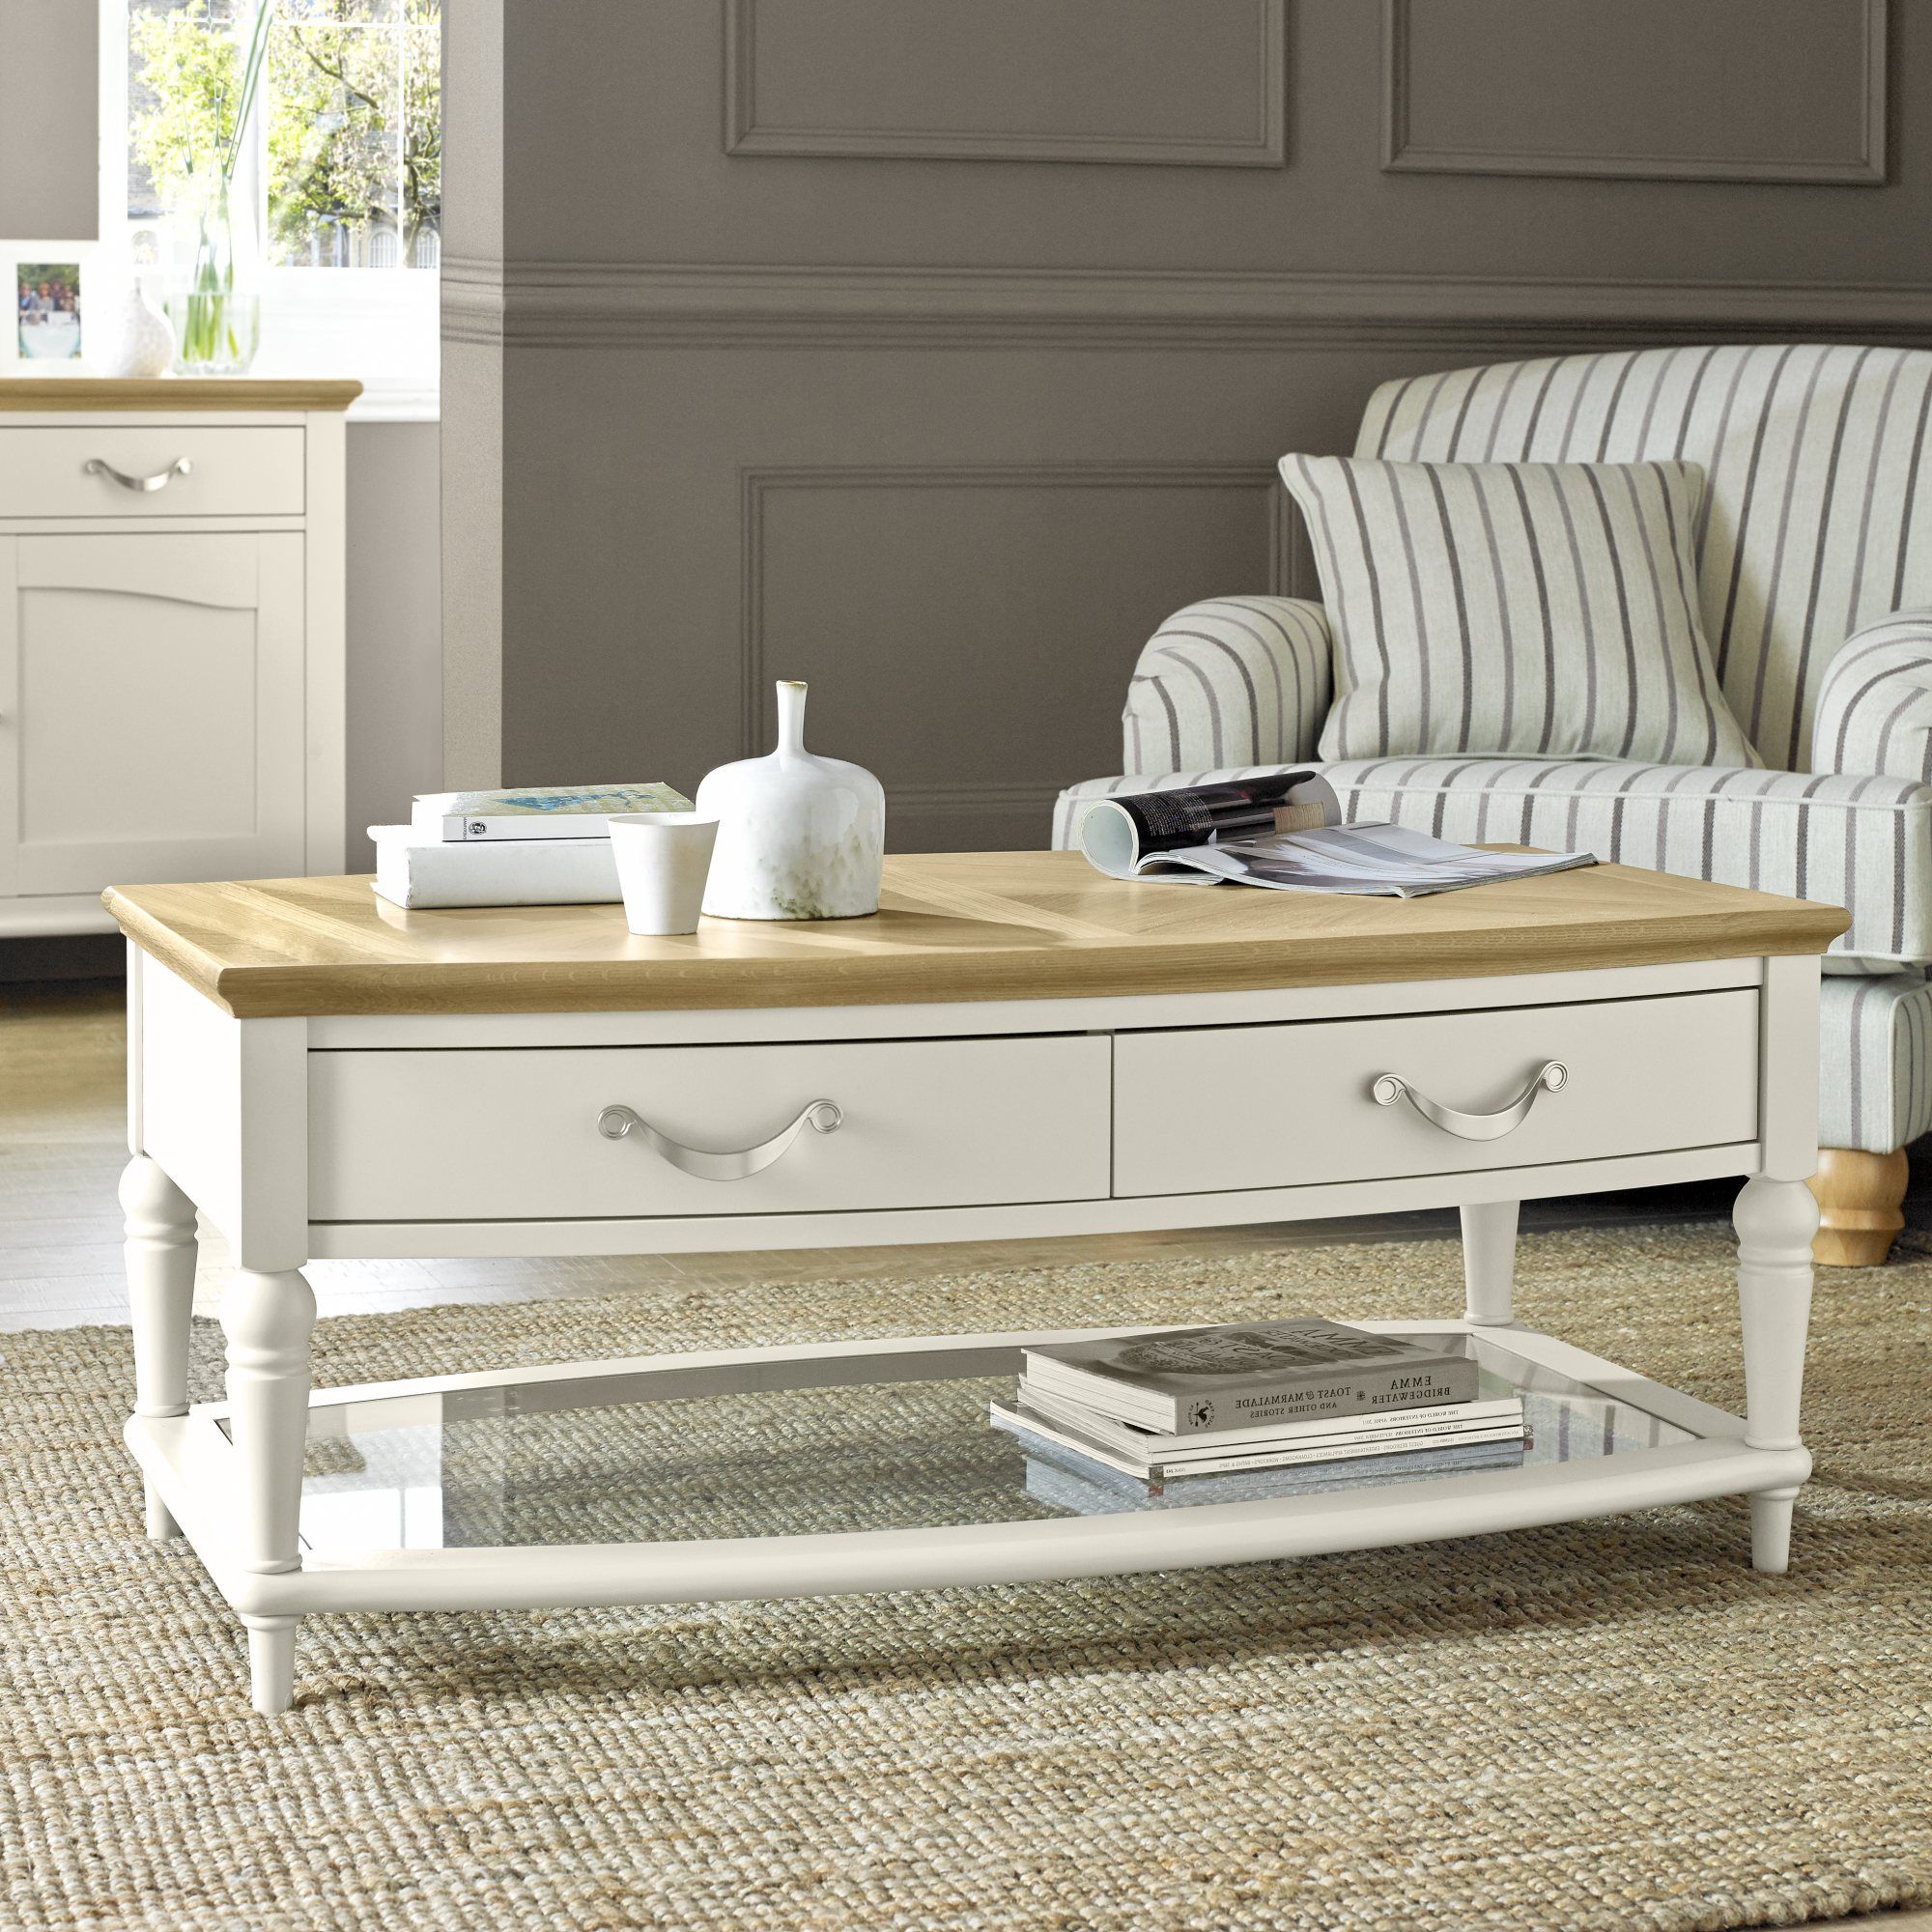 Popular Premier Collection Montreux Pale Oak & Antique White With Vintage Coal Coffee Tables (View 3 of 20)